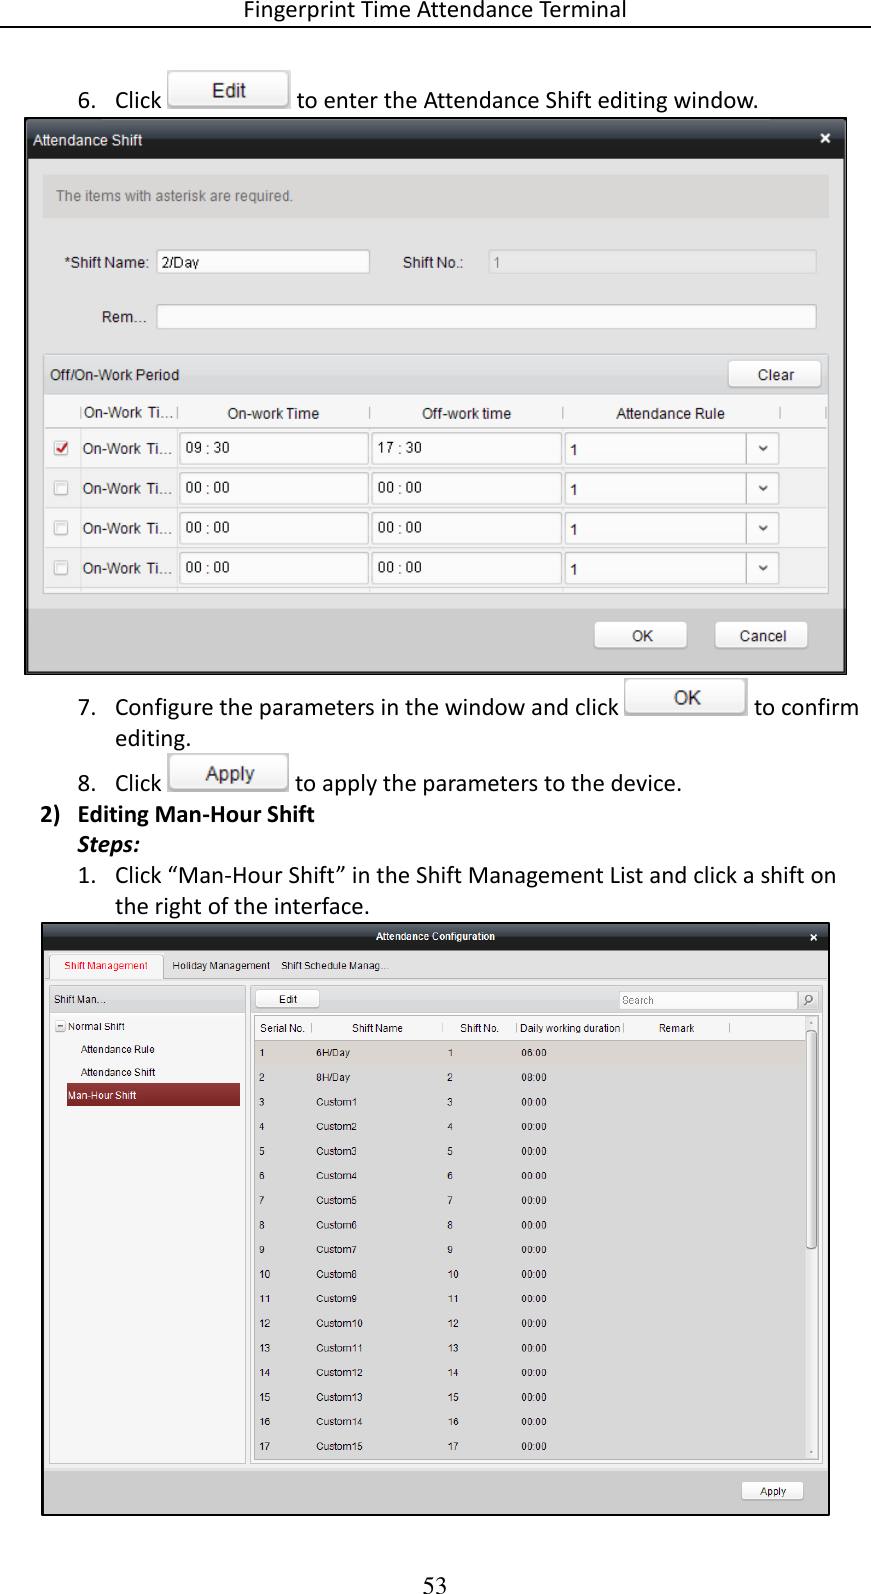 Fingerprint Time Attendance Terminal 53 6. Click   to enter the Attendance Shift editing window.  7. Configure the parameters in the window and click   to confirm editing. 8. Click   to apply the parameters to the device. 2) Editing Man-Hour Shift Steps: 1. Click “Man-Hour Shift” in the Shift Management List and click a shift on the right of the interface.  